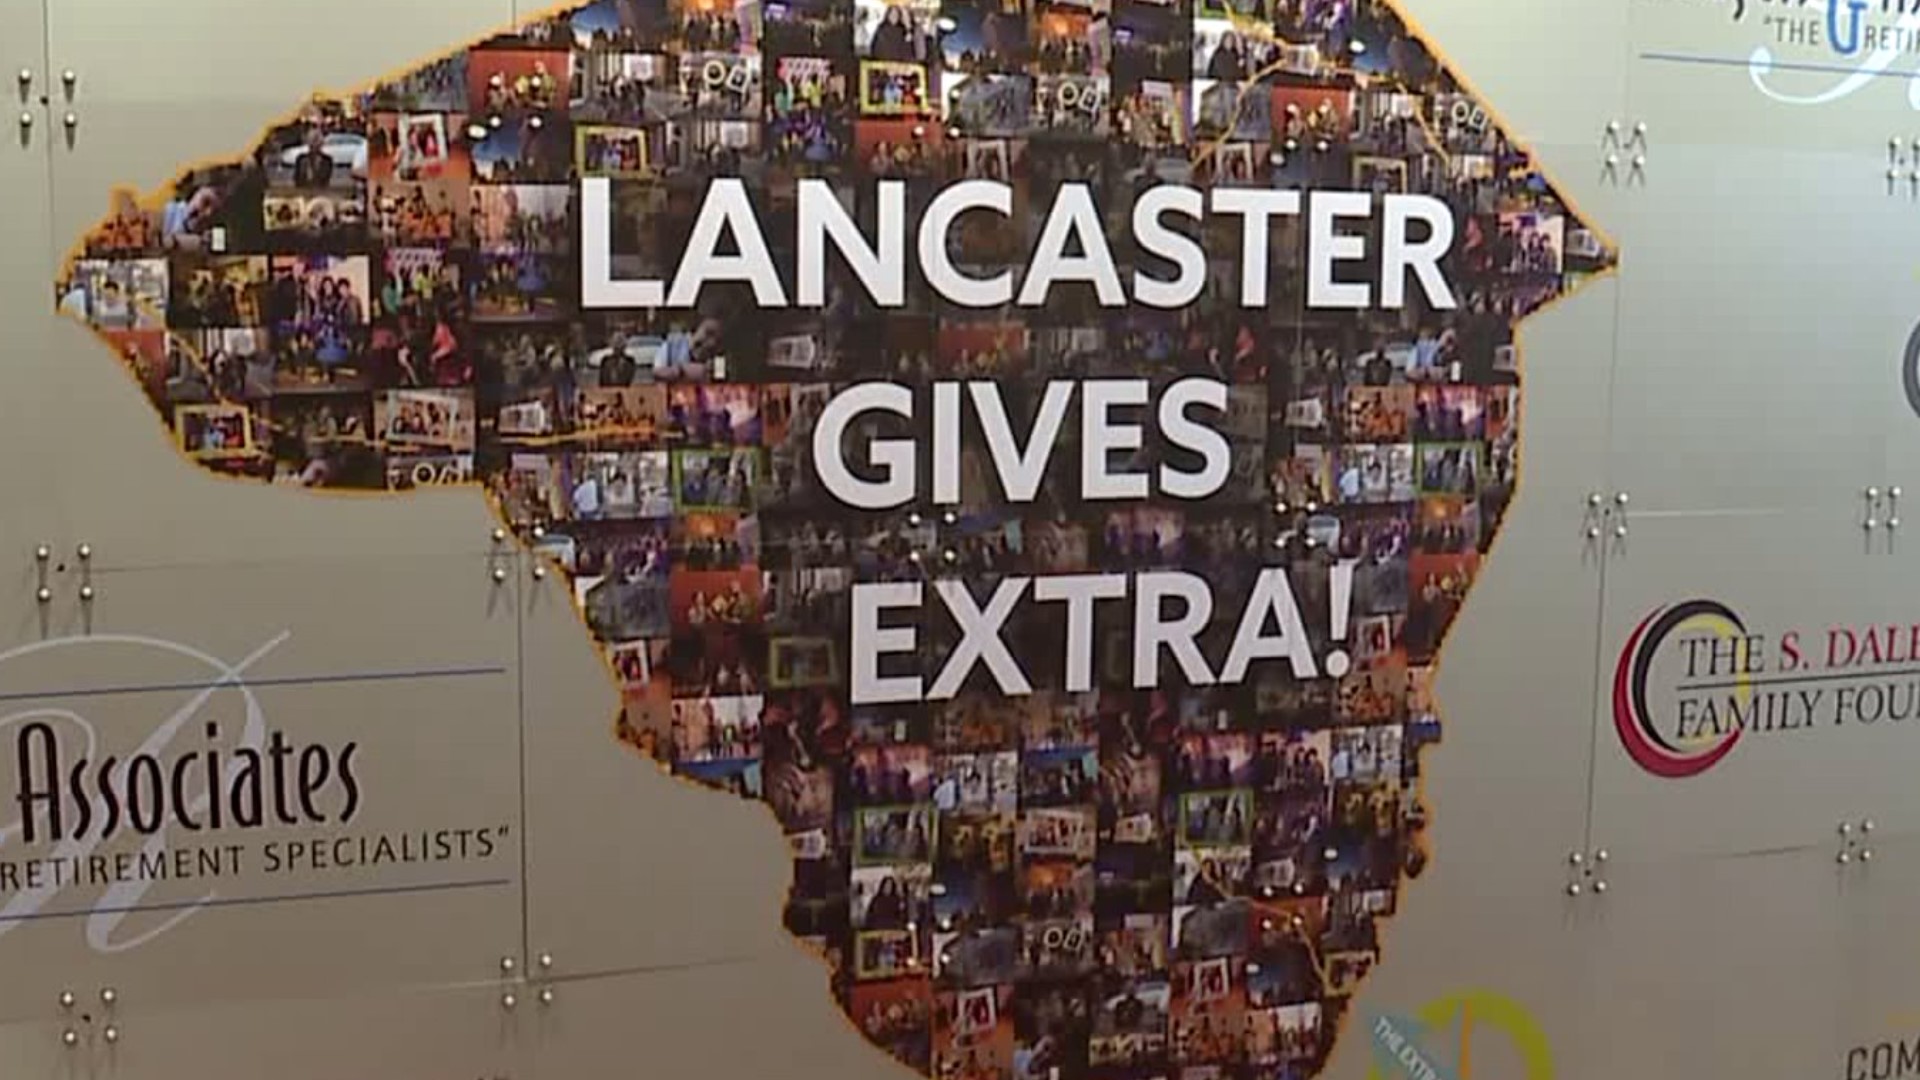 Lancaster's Extraordinary Give kicked off on Friday, Nov. 18. The event highlights hundreds of non-profit organizations.